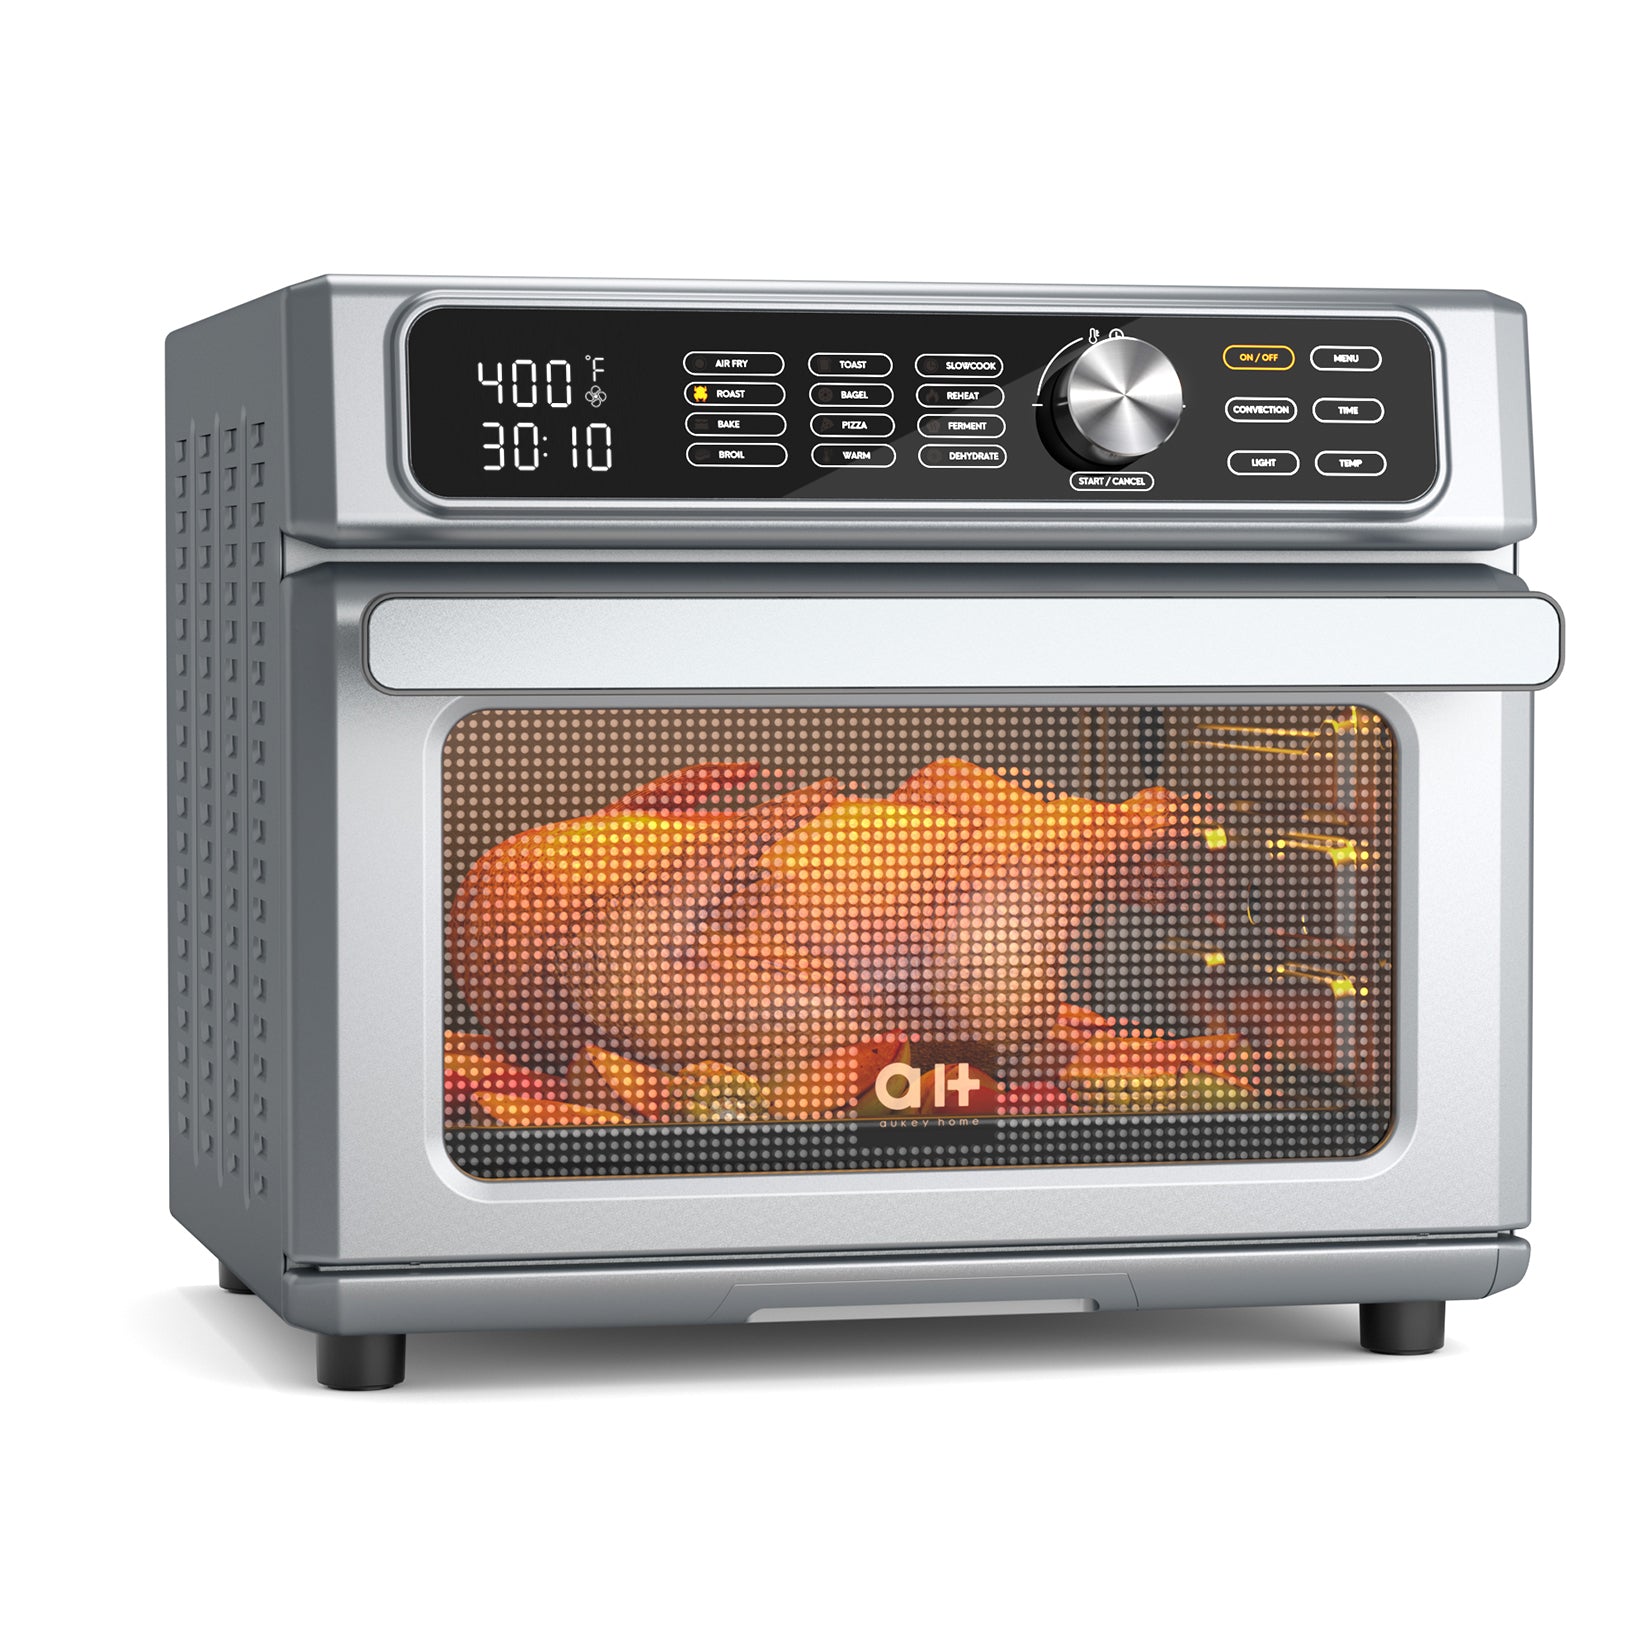 Chefman Toast-Air Touch Air Fryer Toaster Oven Combo, 4-In-1 Black